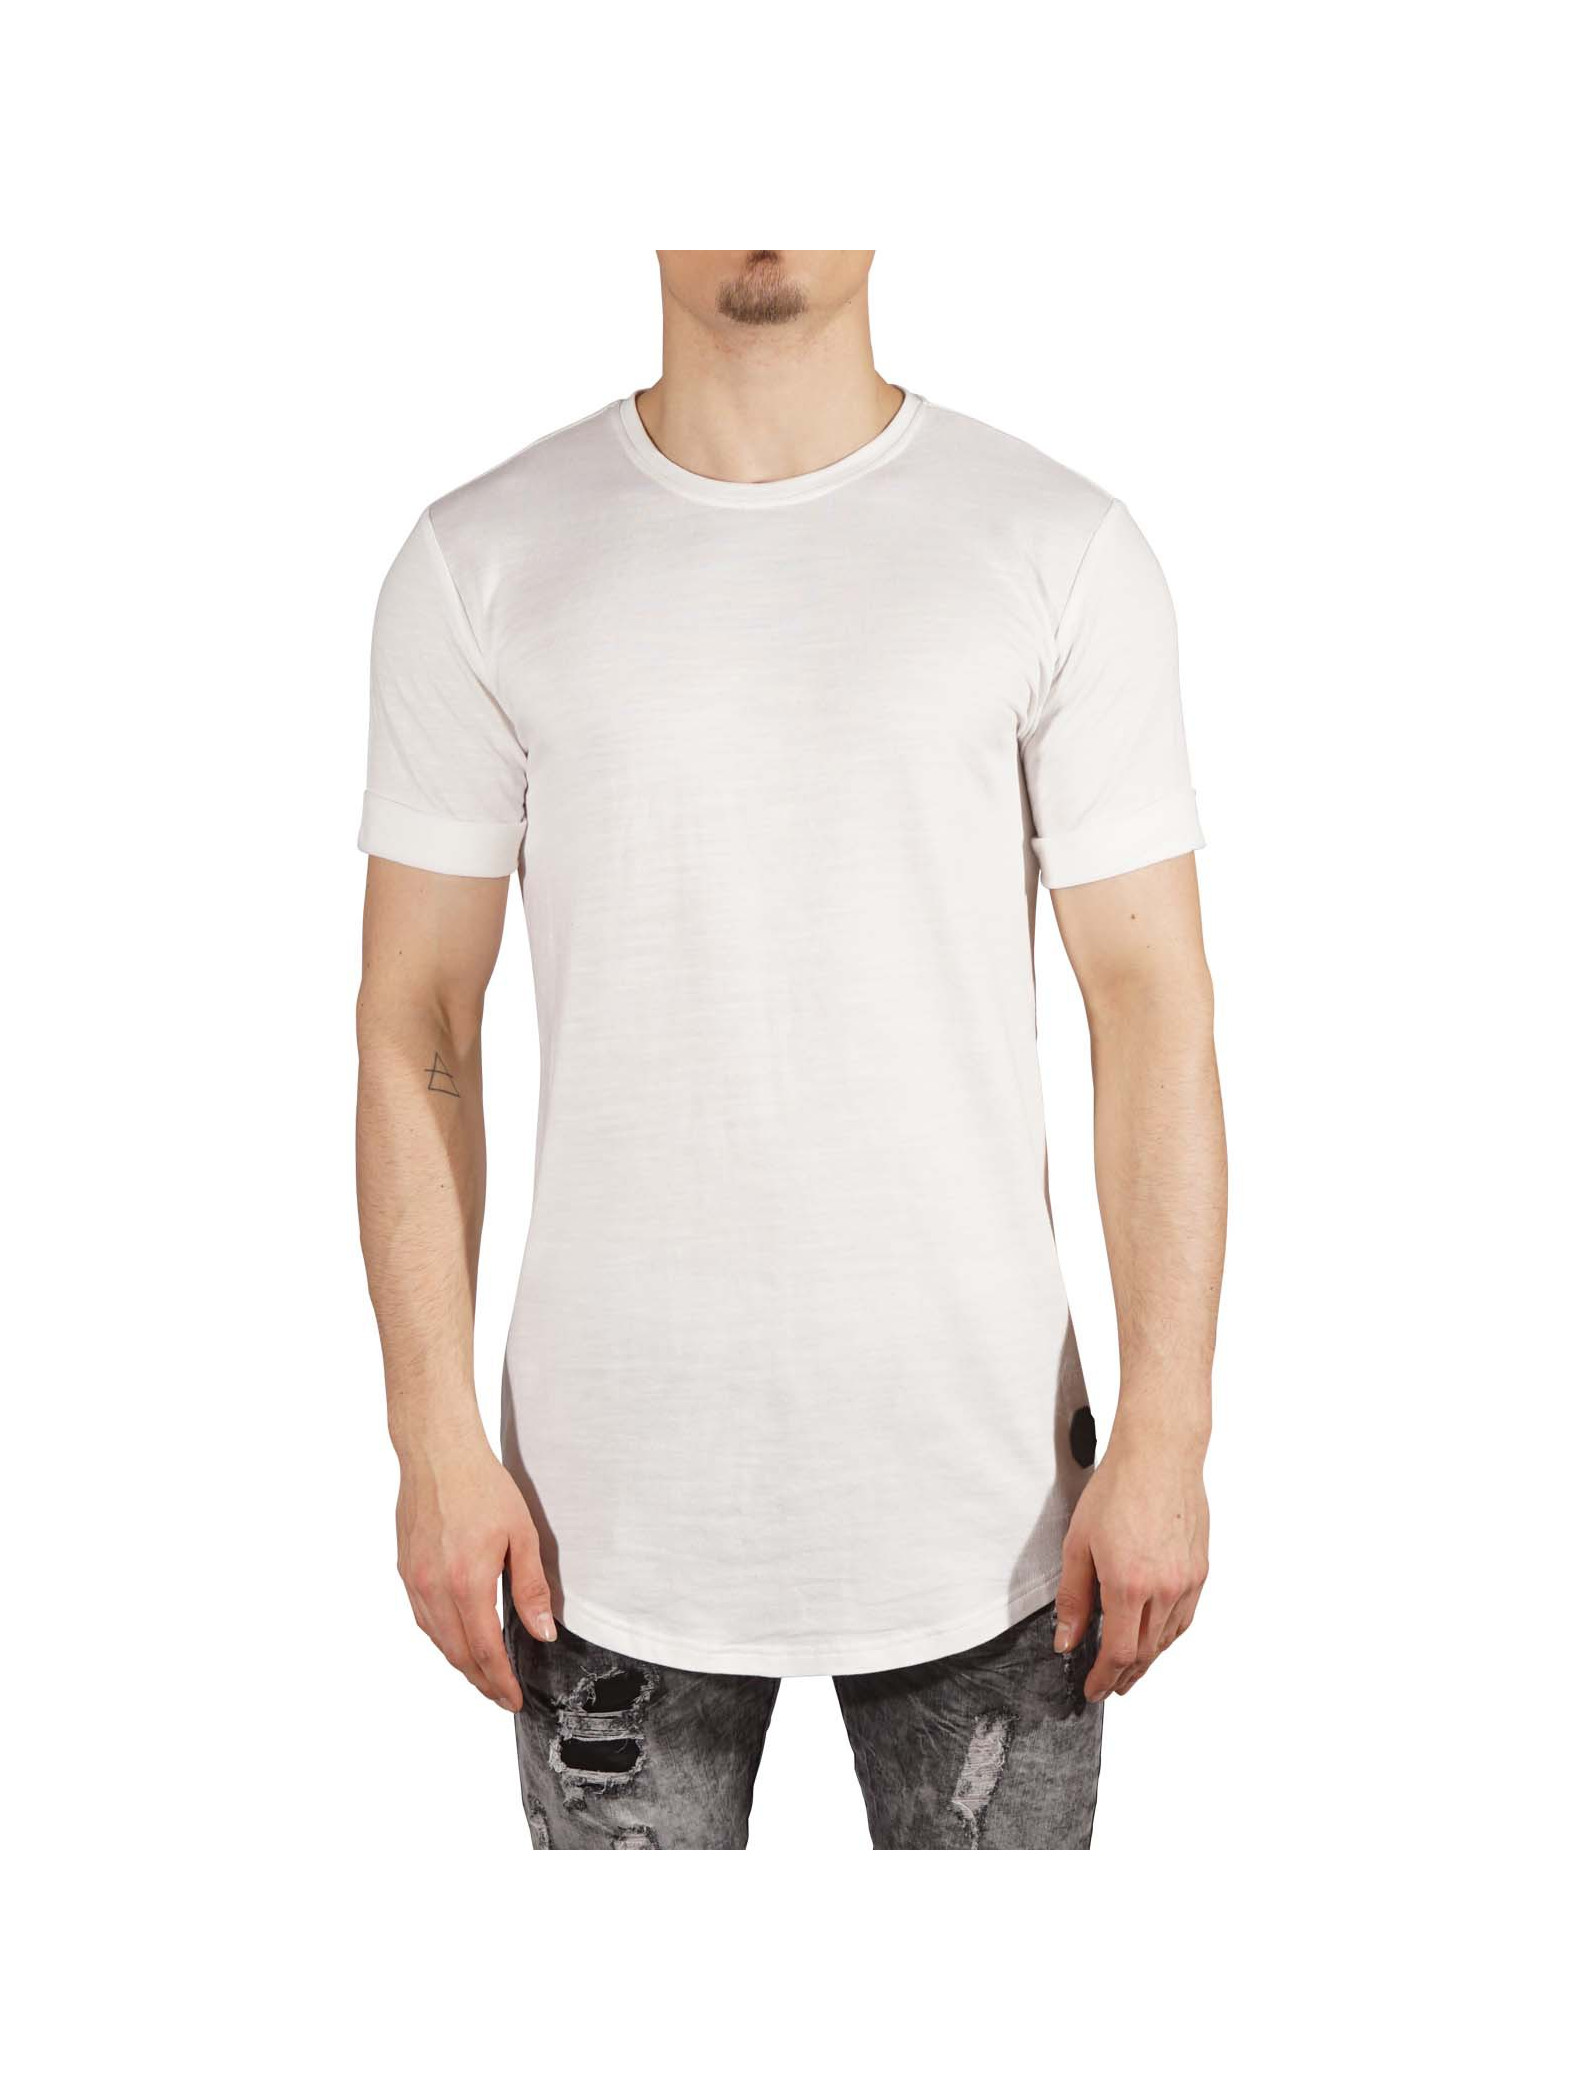 Rolled-Up Sleeve Tee Shirt Project X Paris 88171153